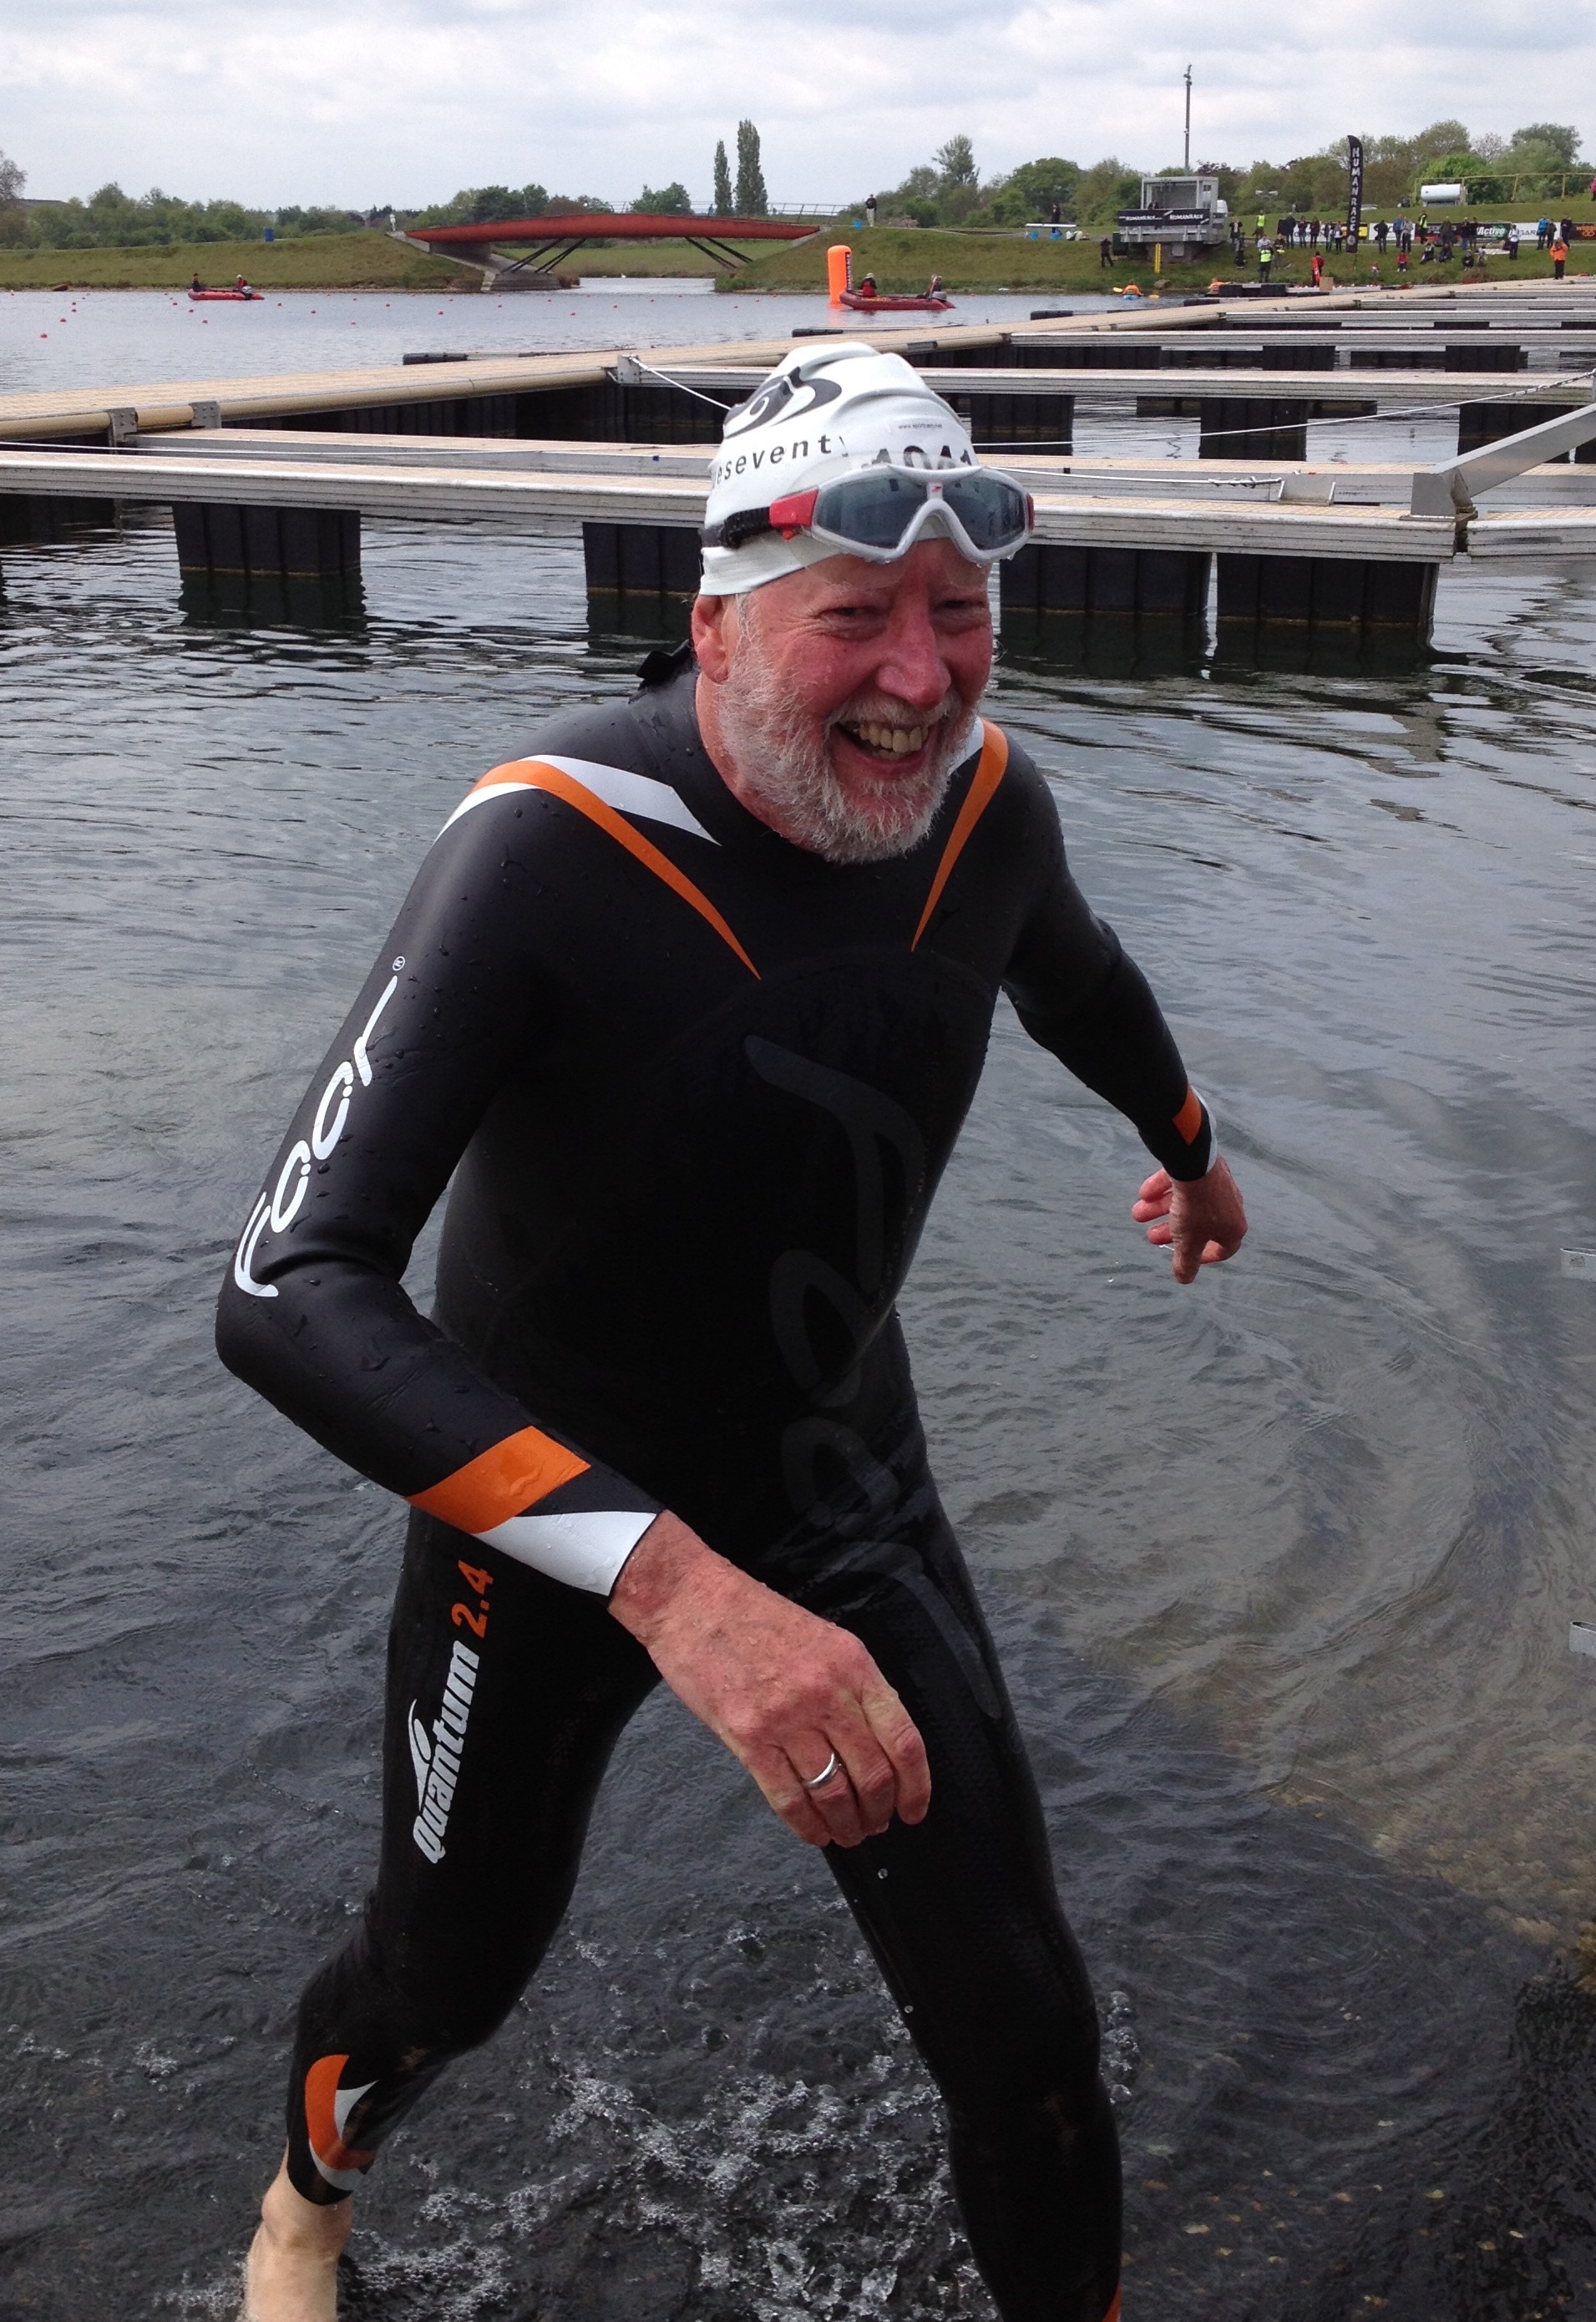 64 and doing first triathlon coming out of the swim smiling